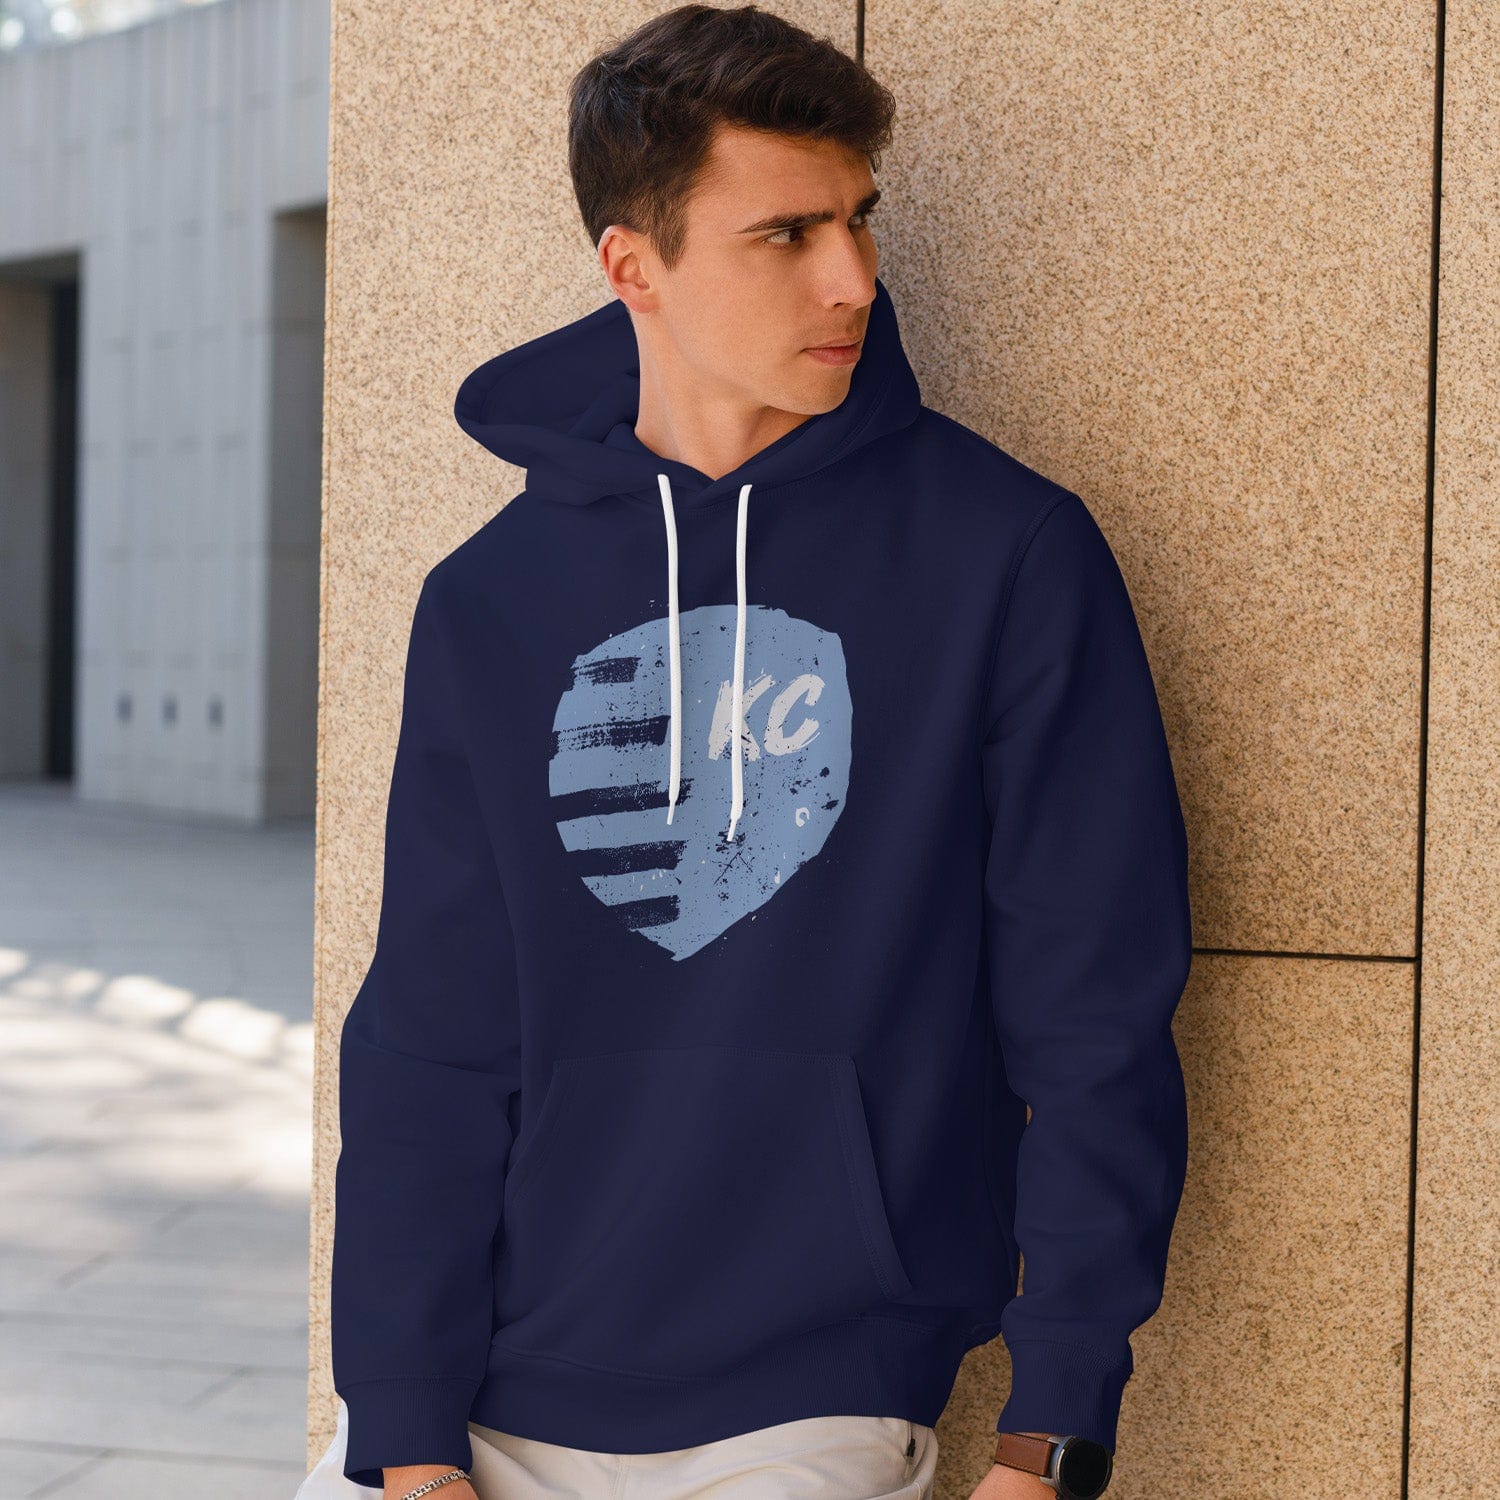 KC Swag Sporting Kansas City powder, white PAINTED SHIELD on navy fleece pullover hoodie worn by male model leaning on stone wall in outdoor plaza